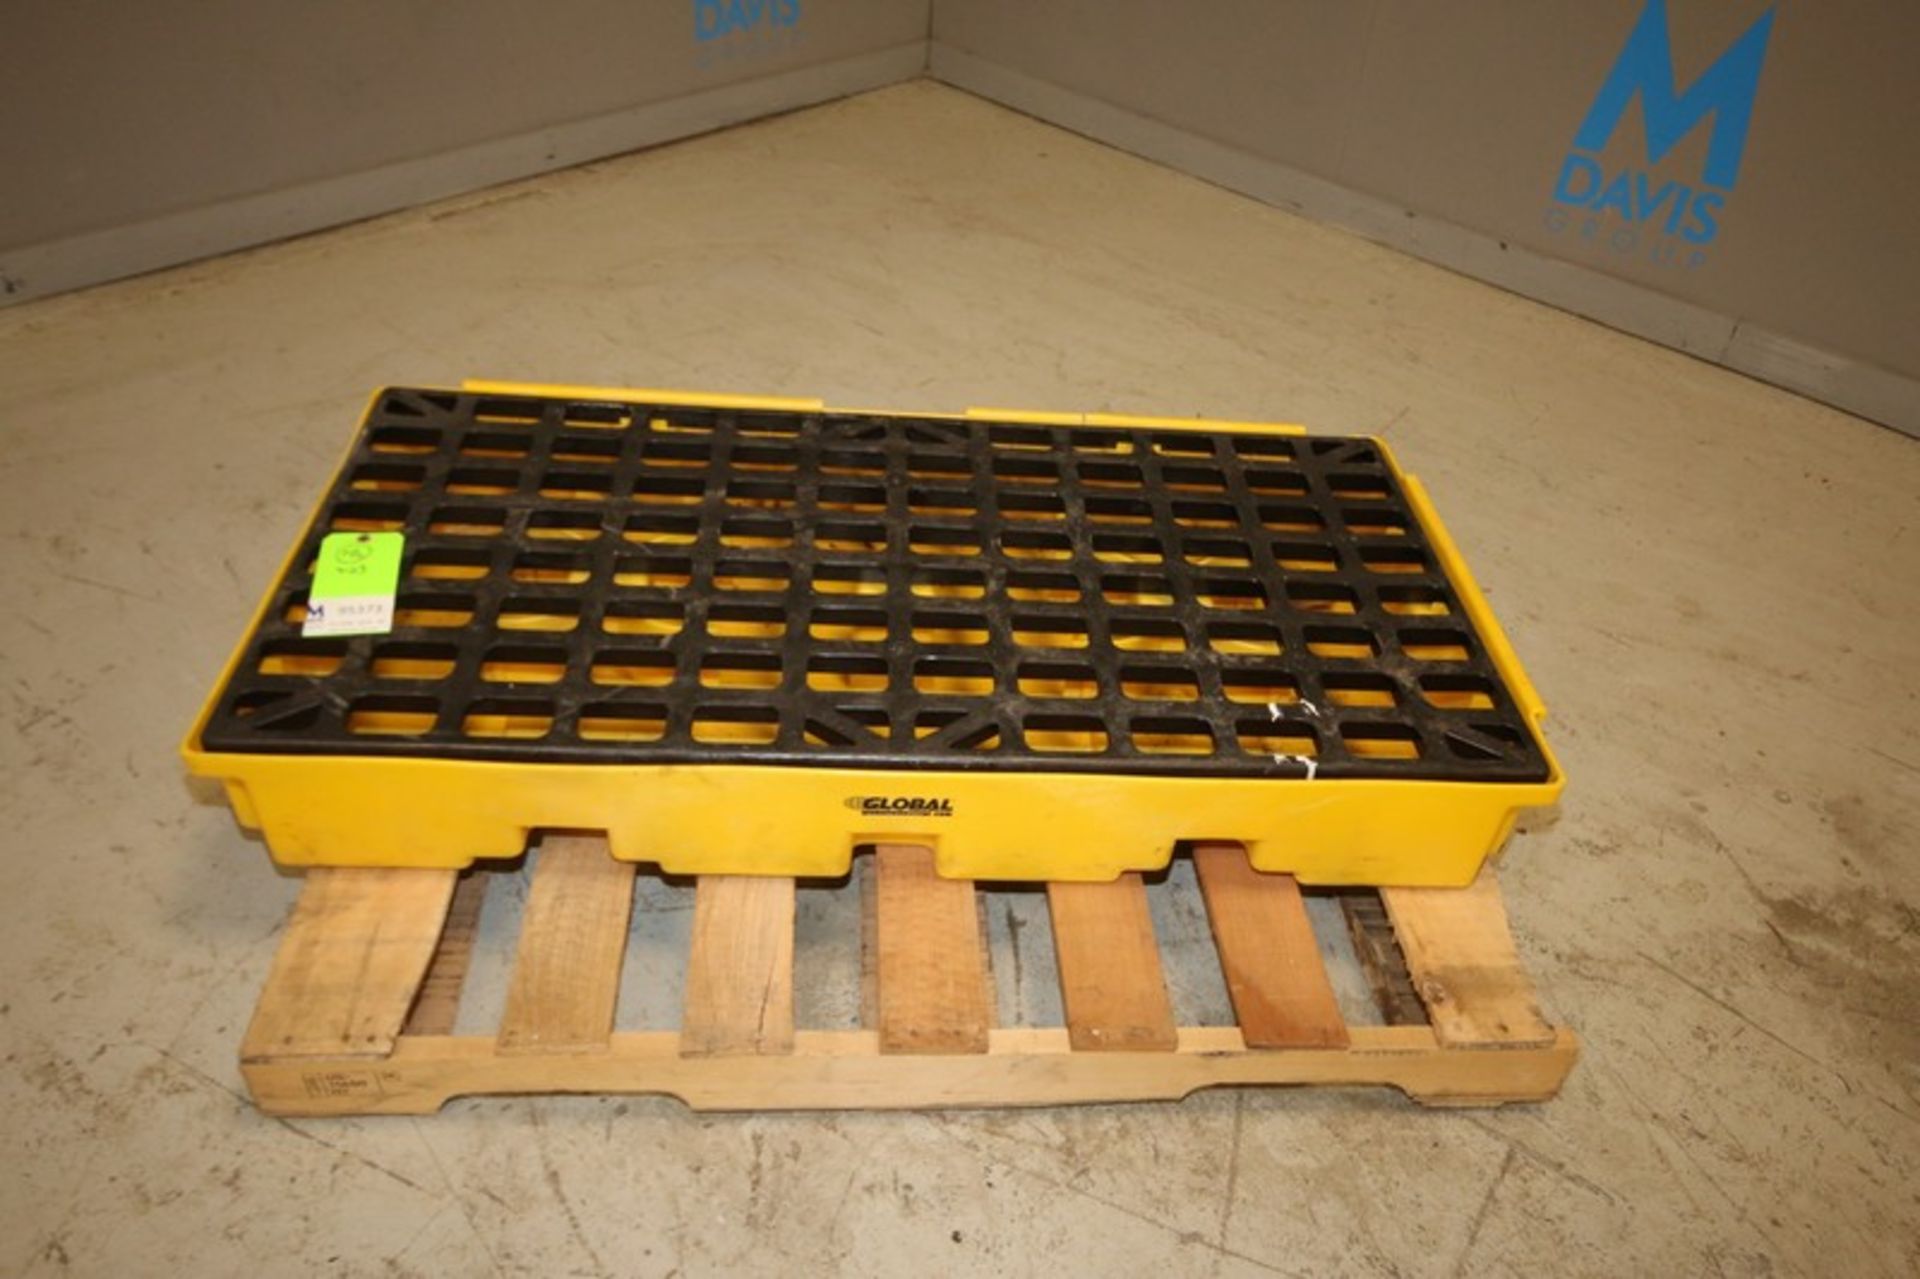 Global Barrel Pallet Containment, 51" L x 26" W (INV#95373)(Located @ the MDG Auction Showroom in